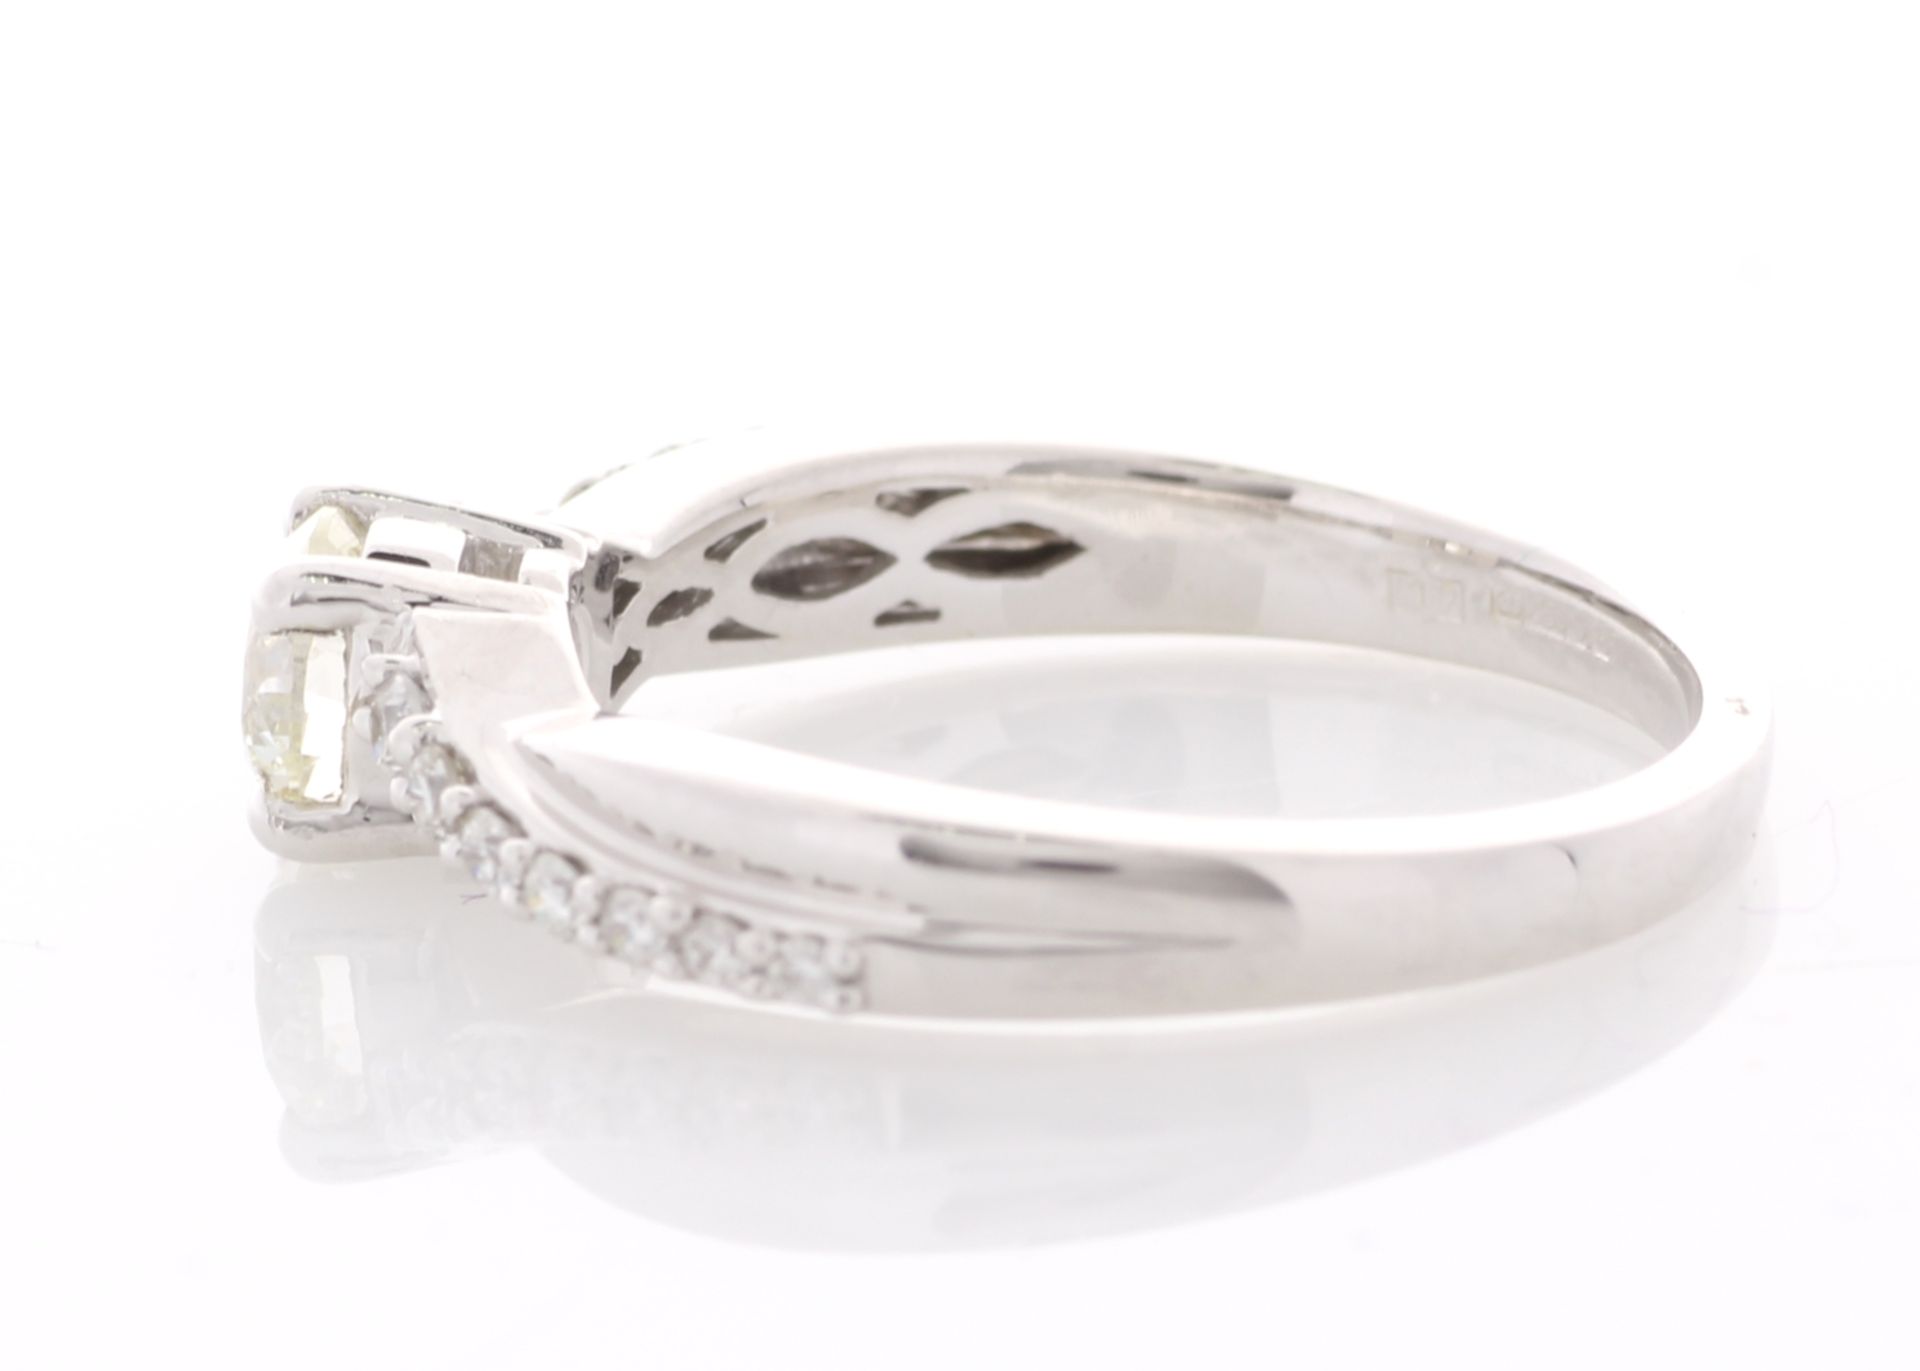 18ct White Gold Single Stone Fancy Claw Set Diamond Ring (0.52) 0.70 Carats - Valued by IDI £5,995. - Image 2 of 5